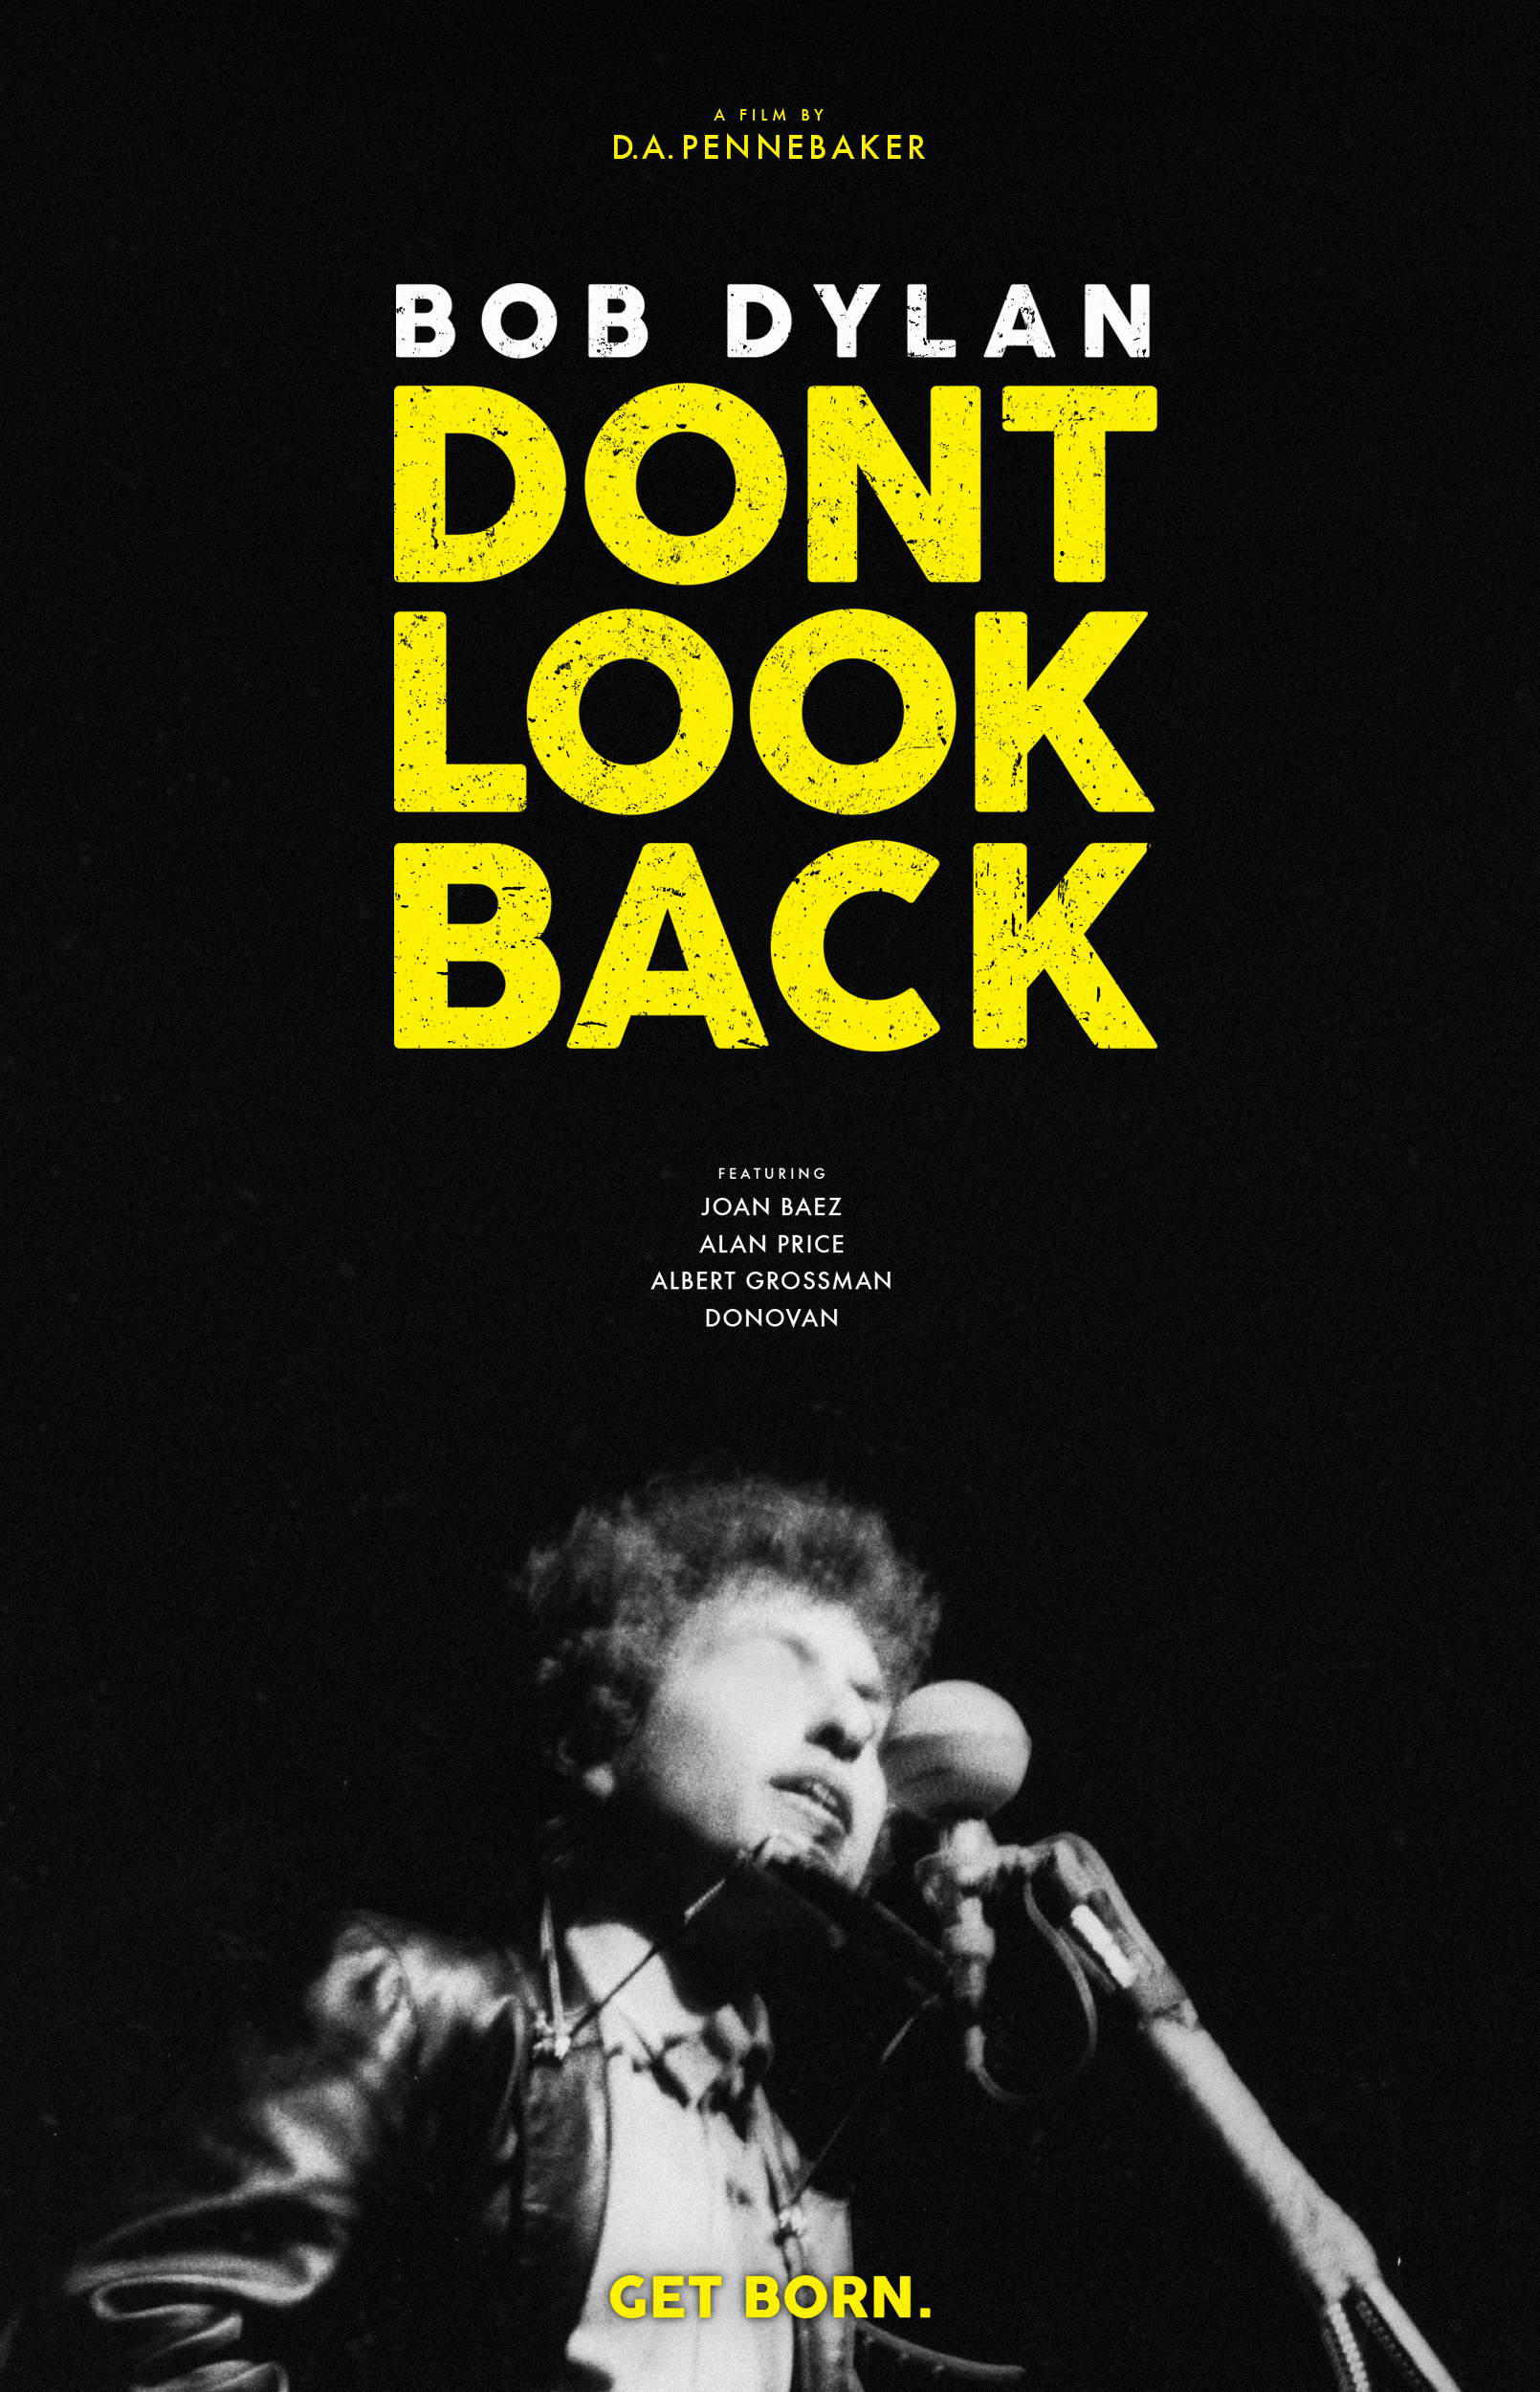 50th Anniversary! DON’T LOOK BACK